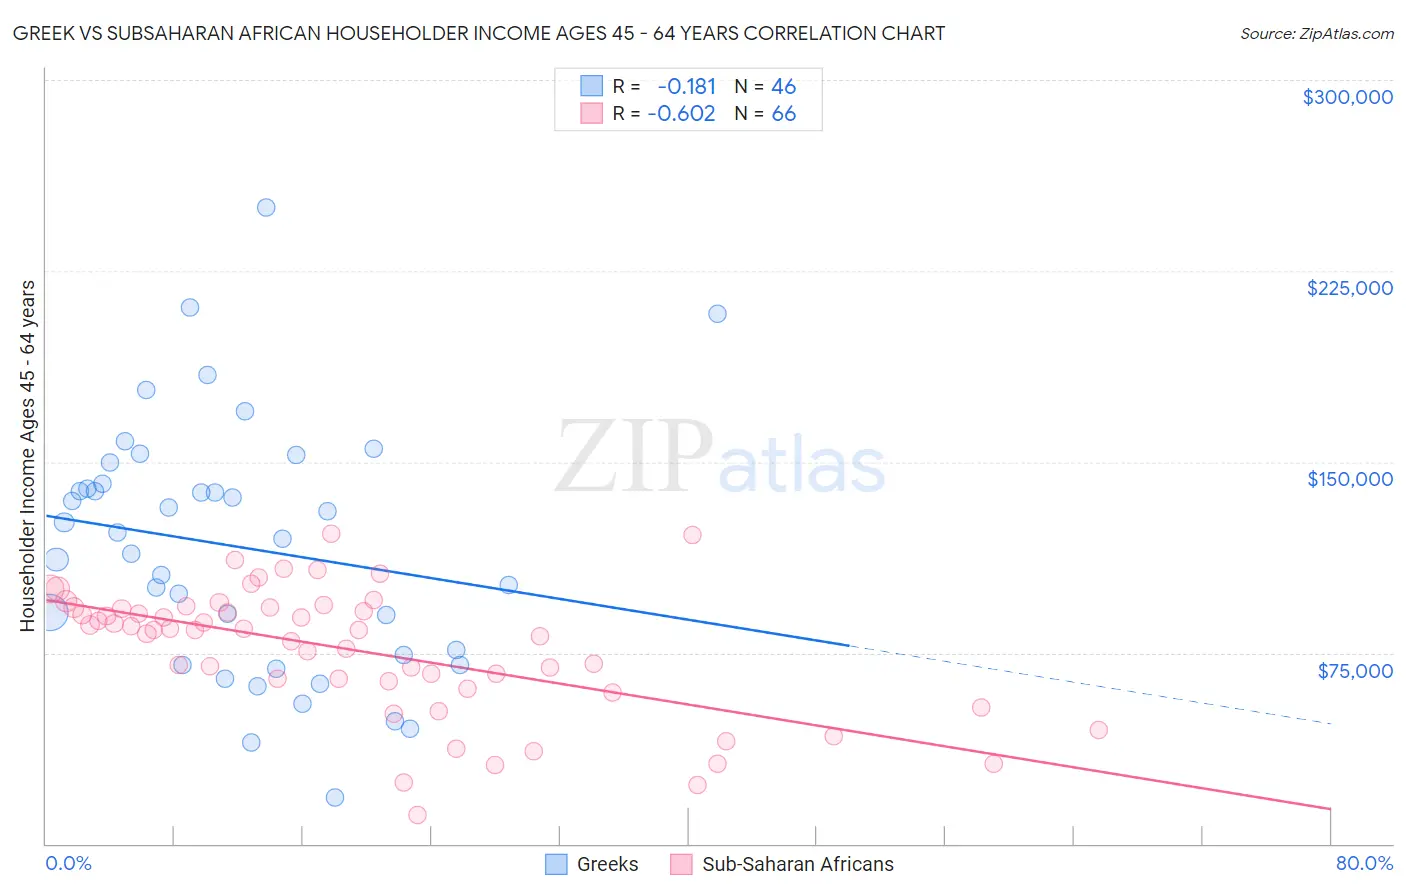 Greek vs Subsaharan African Householder Income Ages 45 - 64 years